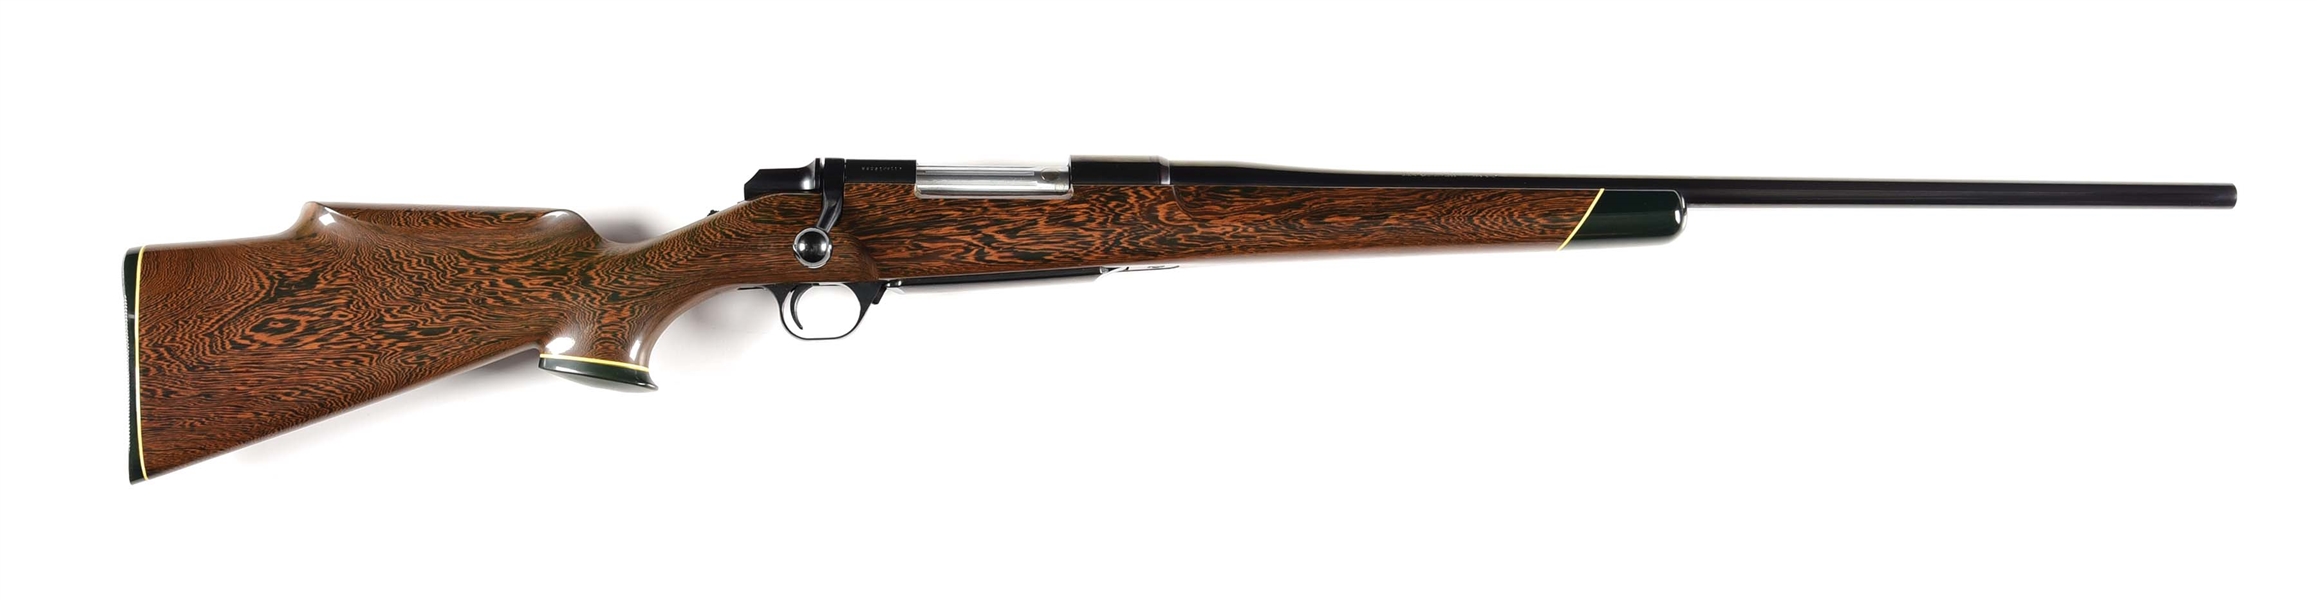 (M) PHEASANT WOOD STOCKED BROWNING BBR BOLT ACTION RIFLE.